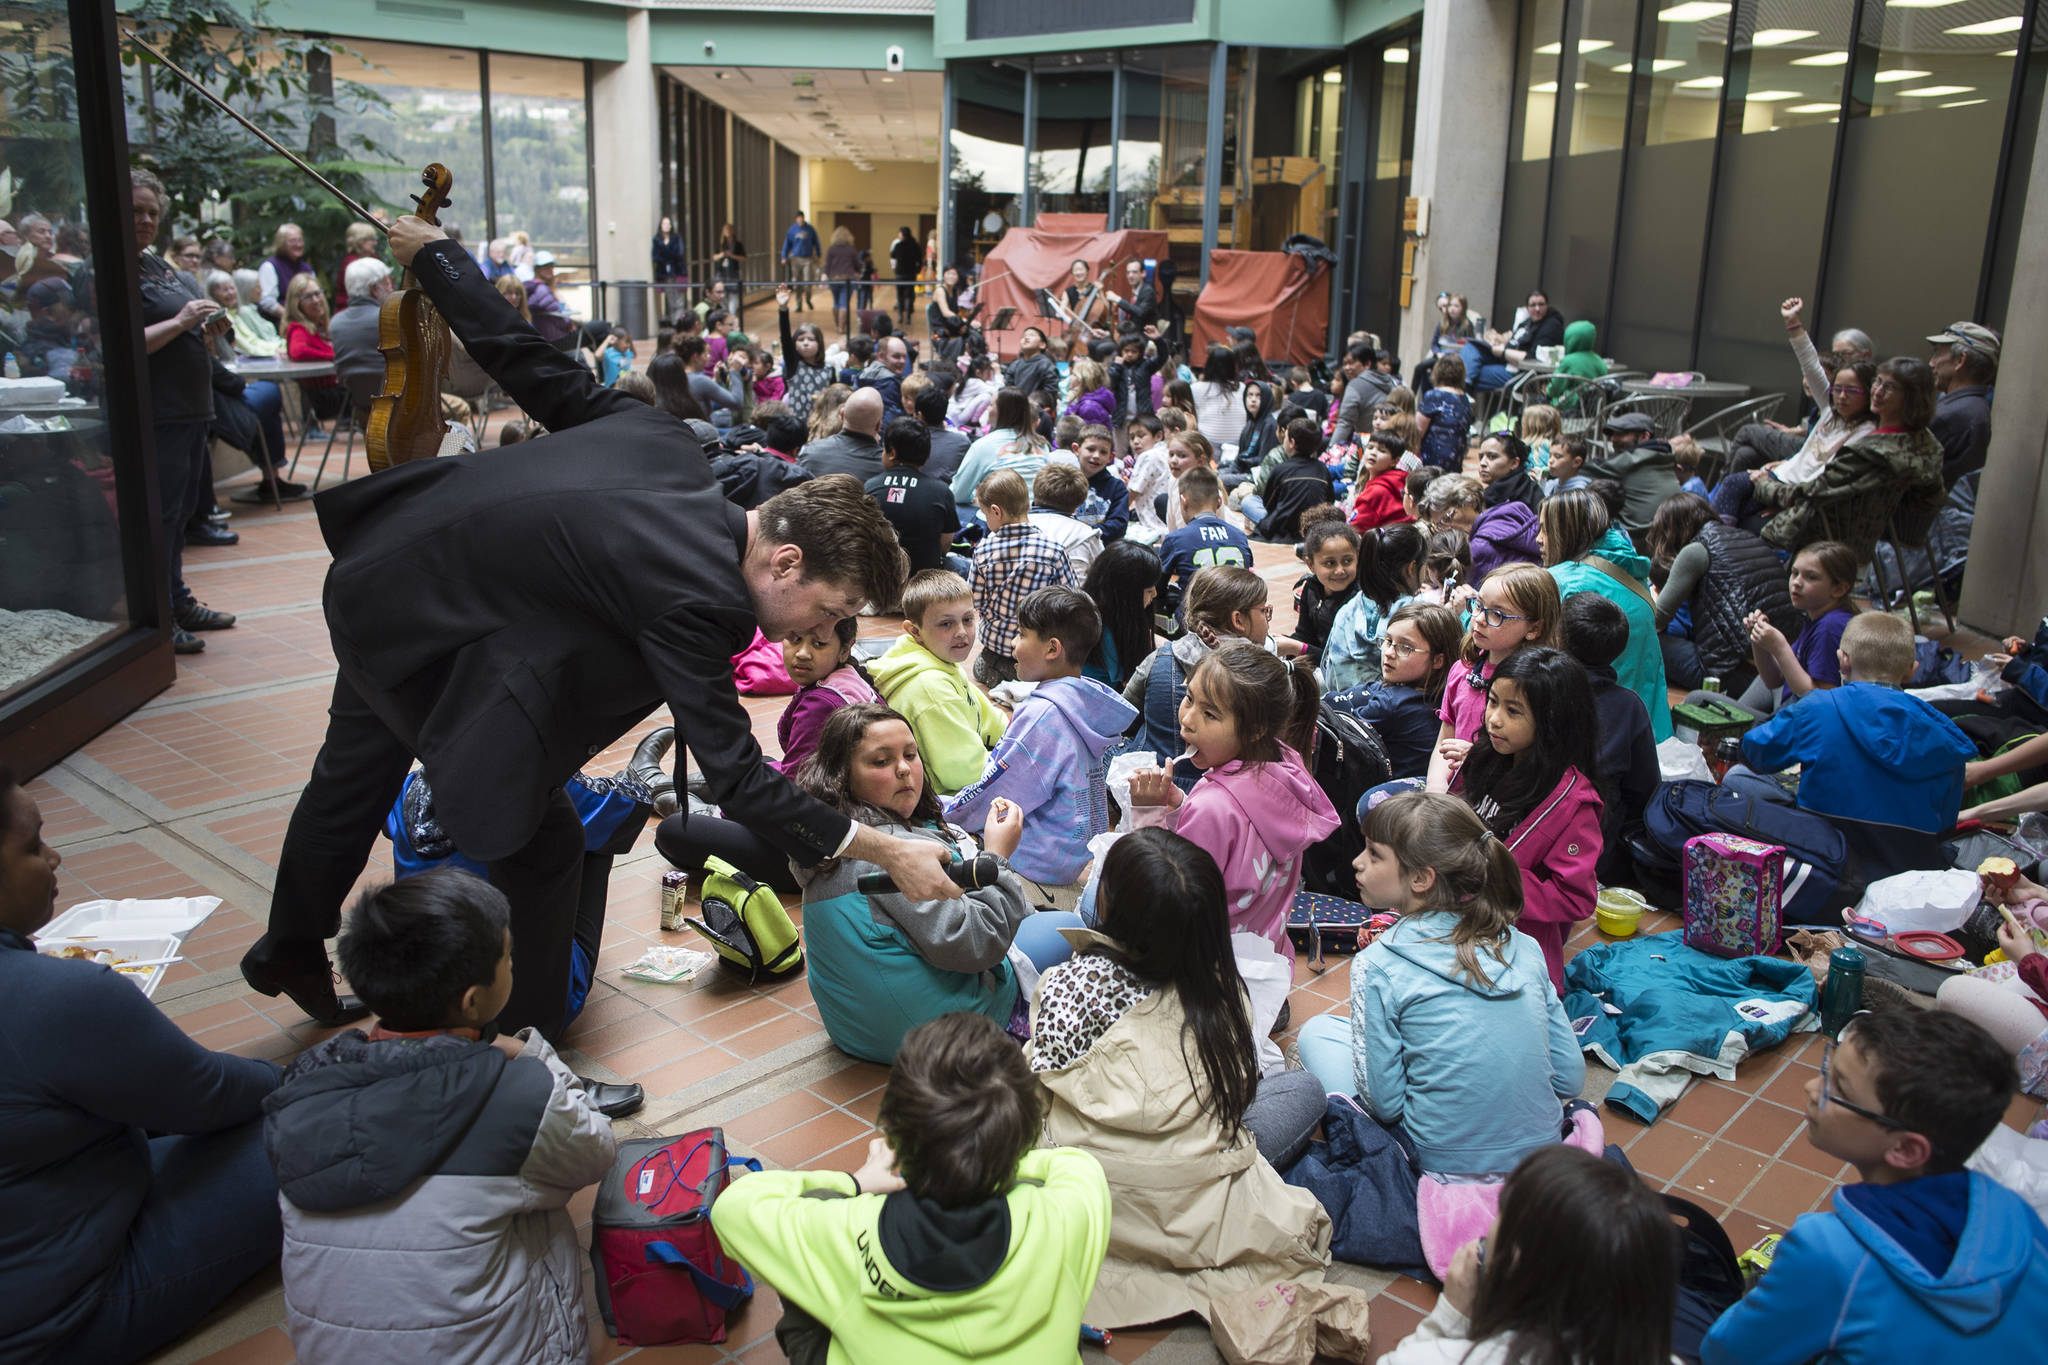 Violinist Jason Issokson wades into a sea of elementary school students to take questions as the Argus String Quartet plays a Brown Bag Concert at the State Office Building on Wednesday, May 15, 2019. (Michael Penn | Juneau Empire)